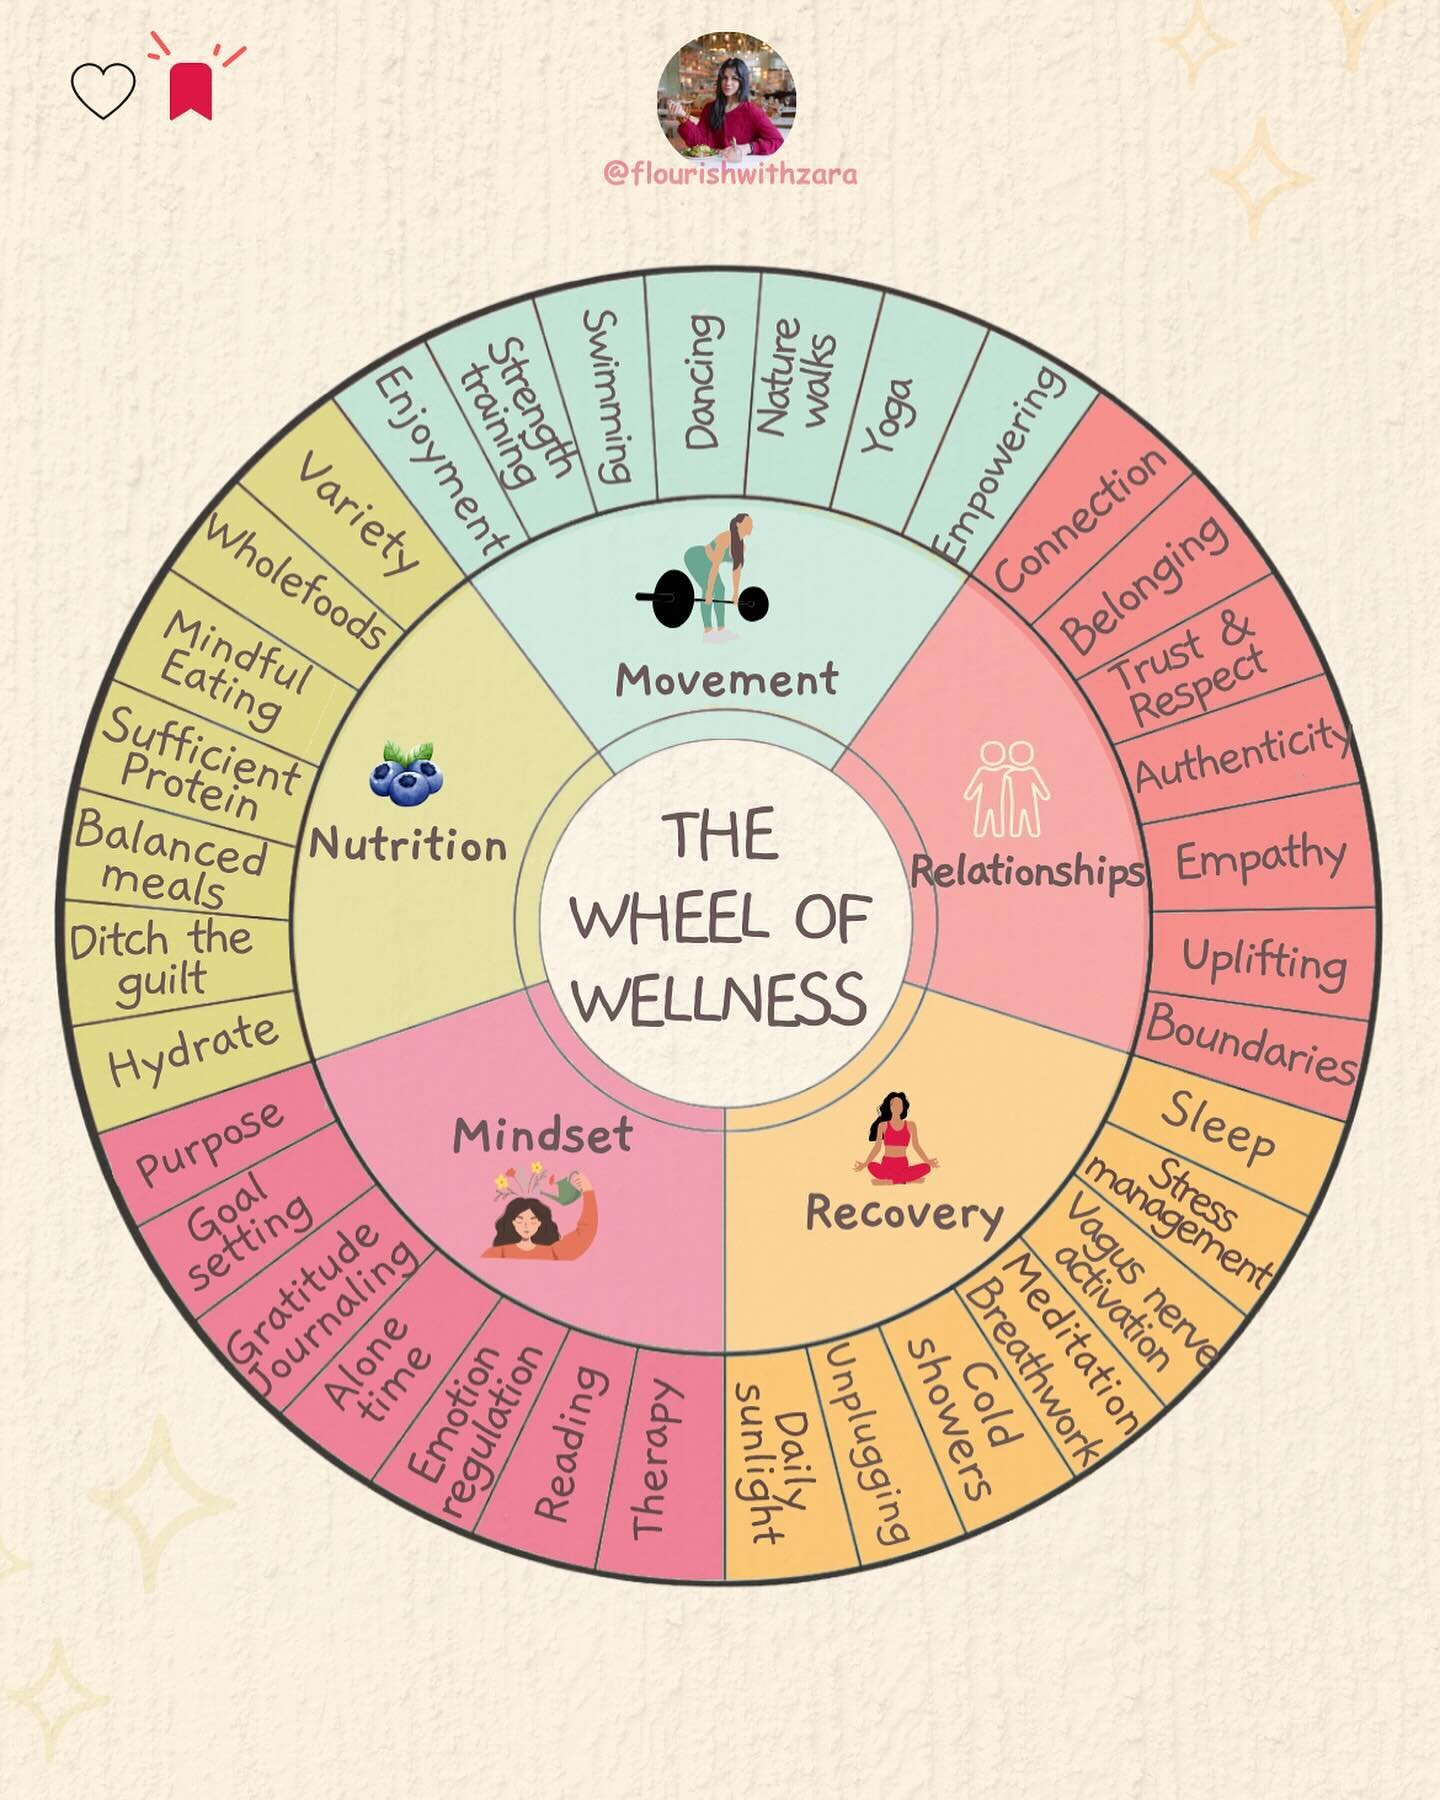 The Wheel of Wellness

It highlights the idea that for us to lead fulfilling lives, we need to find a balance in different areas. 

Each of these areas represents an opportunity for personal growth through small, everyday habits that we can cultivate